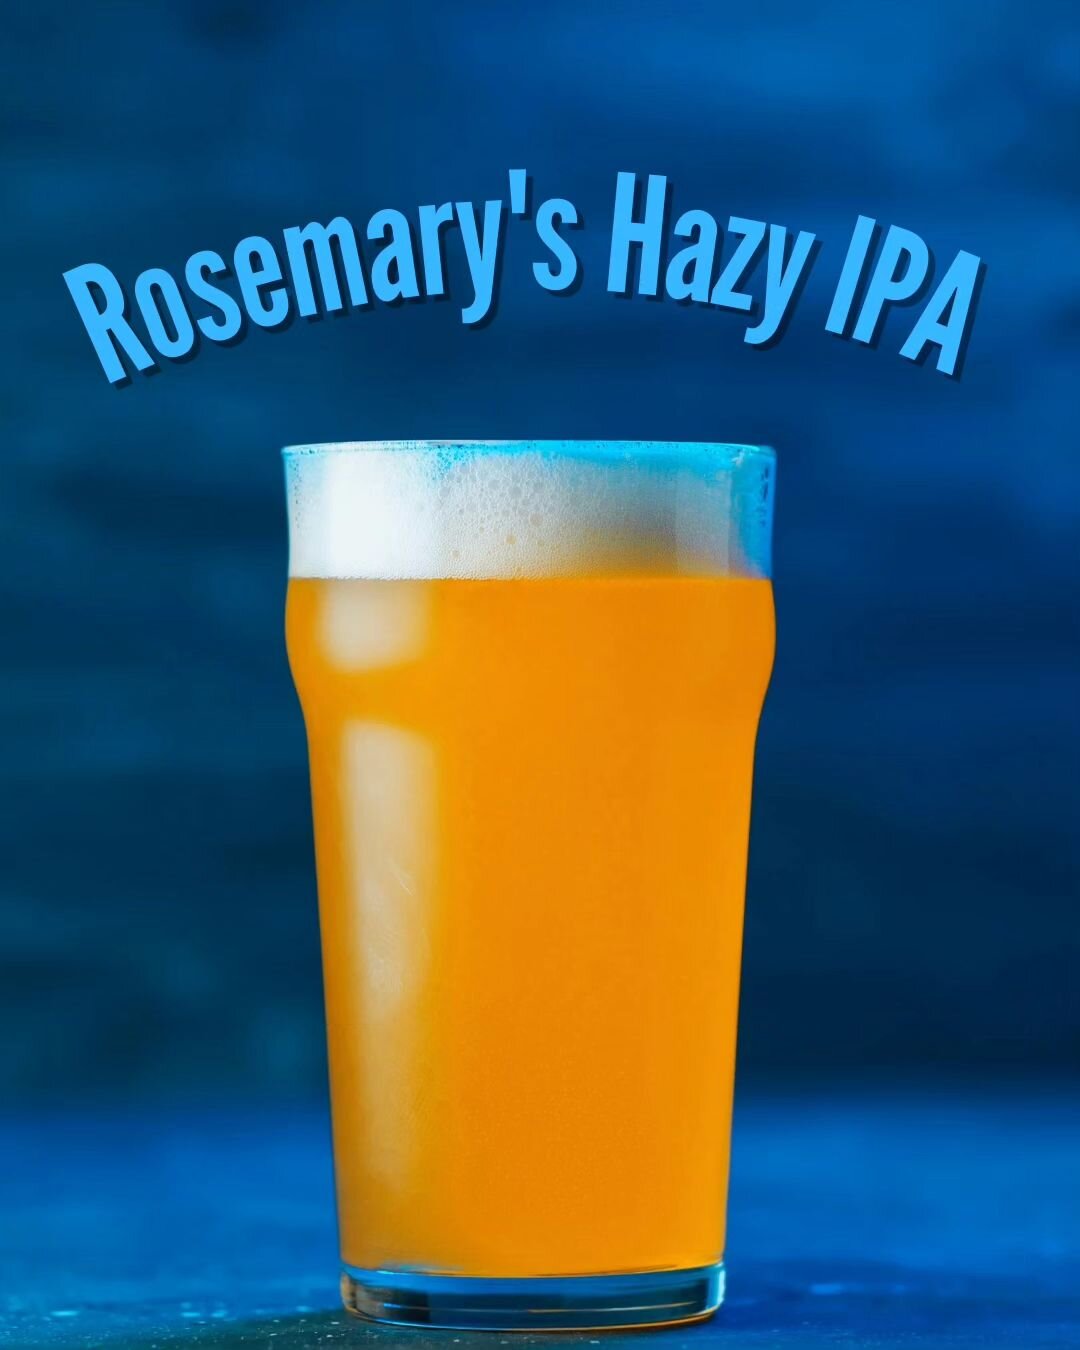 We'll be tapping Rosemary's Hazy IPA at 6pm during the Lee Commons event! 

Just a reminder that we have Faygo, nitro cold brew, and hot coffee available for any NA options 😉